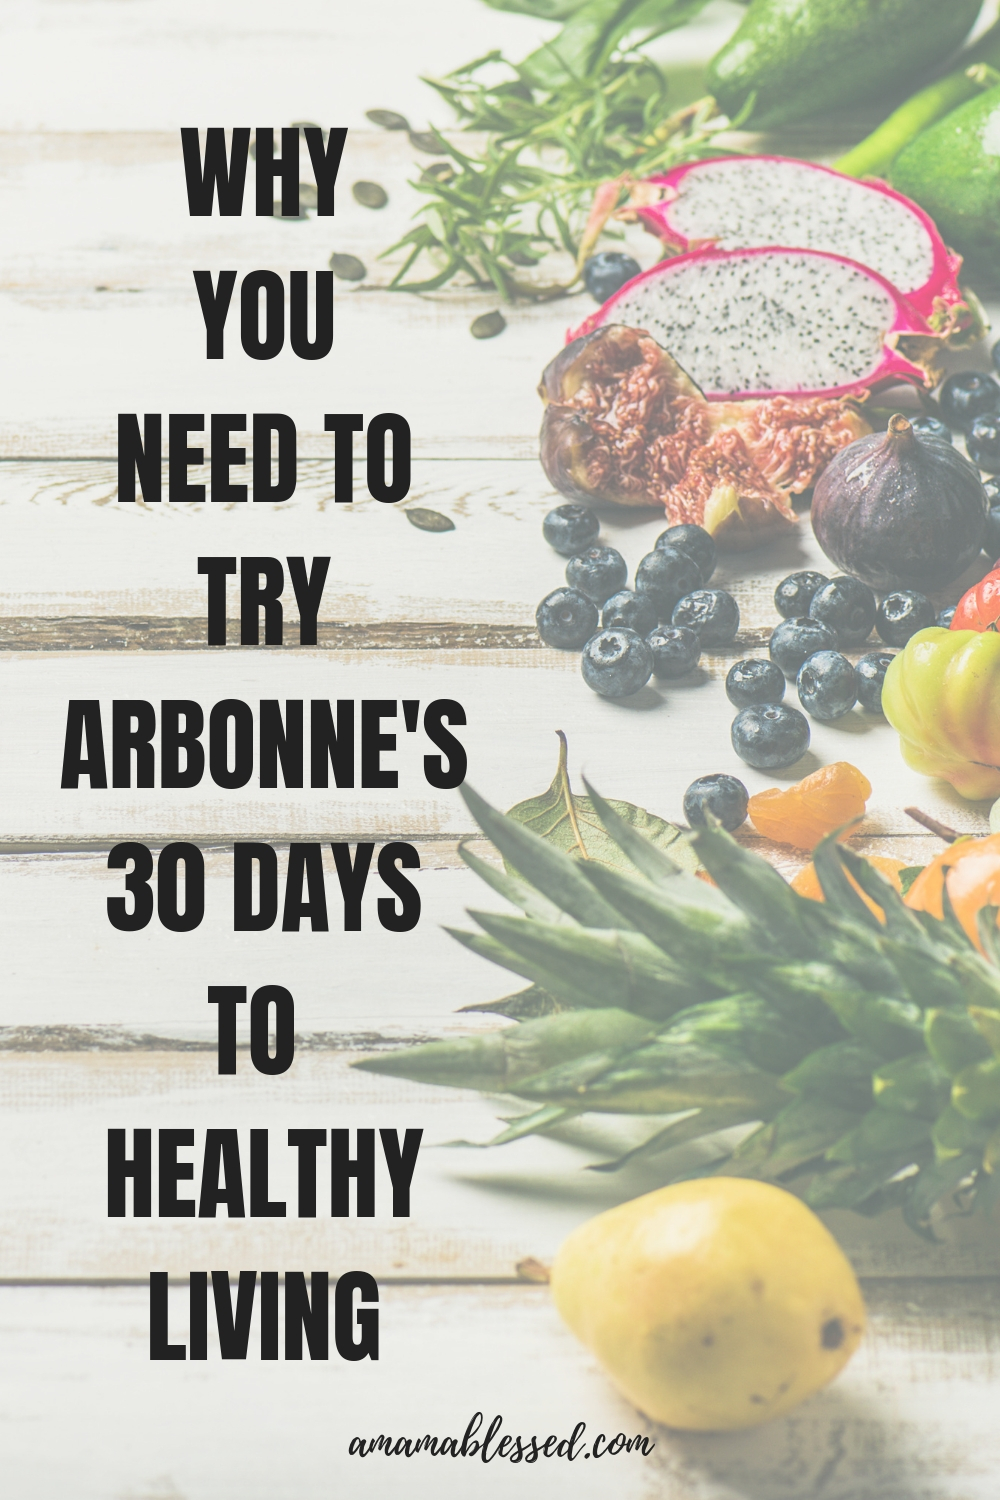 Why you need to try Arbonne's 30 Days to Healthy Living